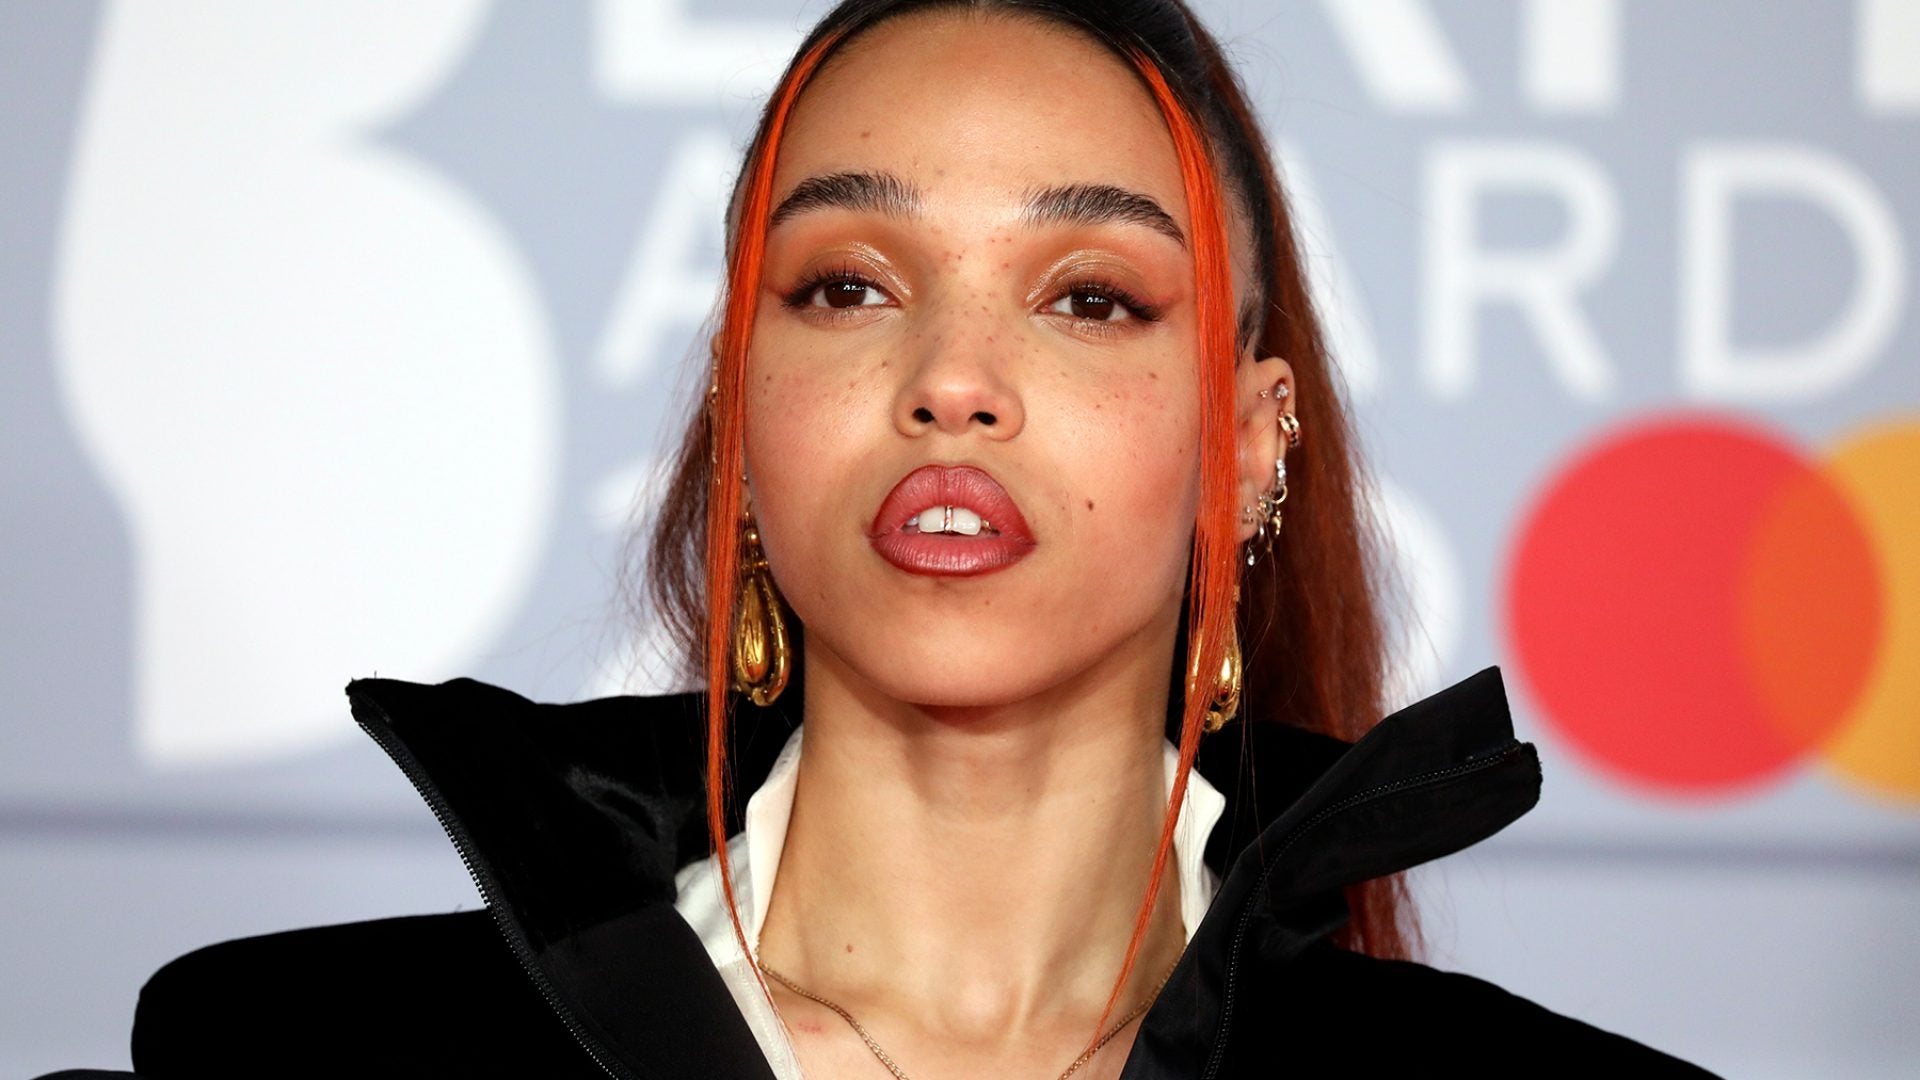 Singer FKA Twigs Sues Shia LaBeouf, Alleges He Physically Abused Her